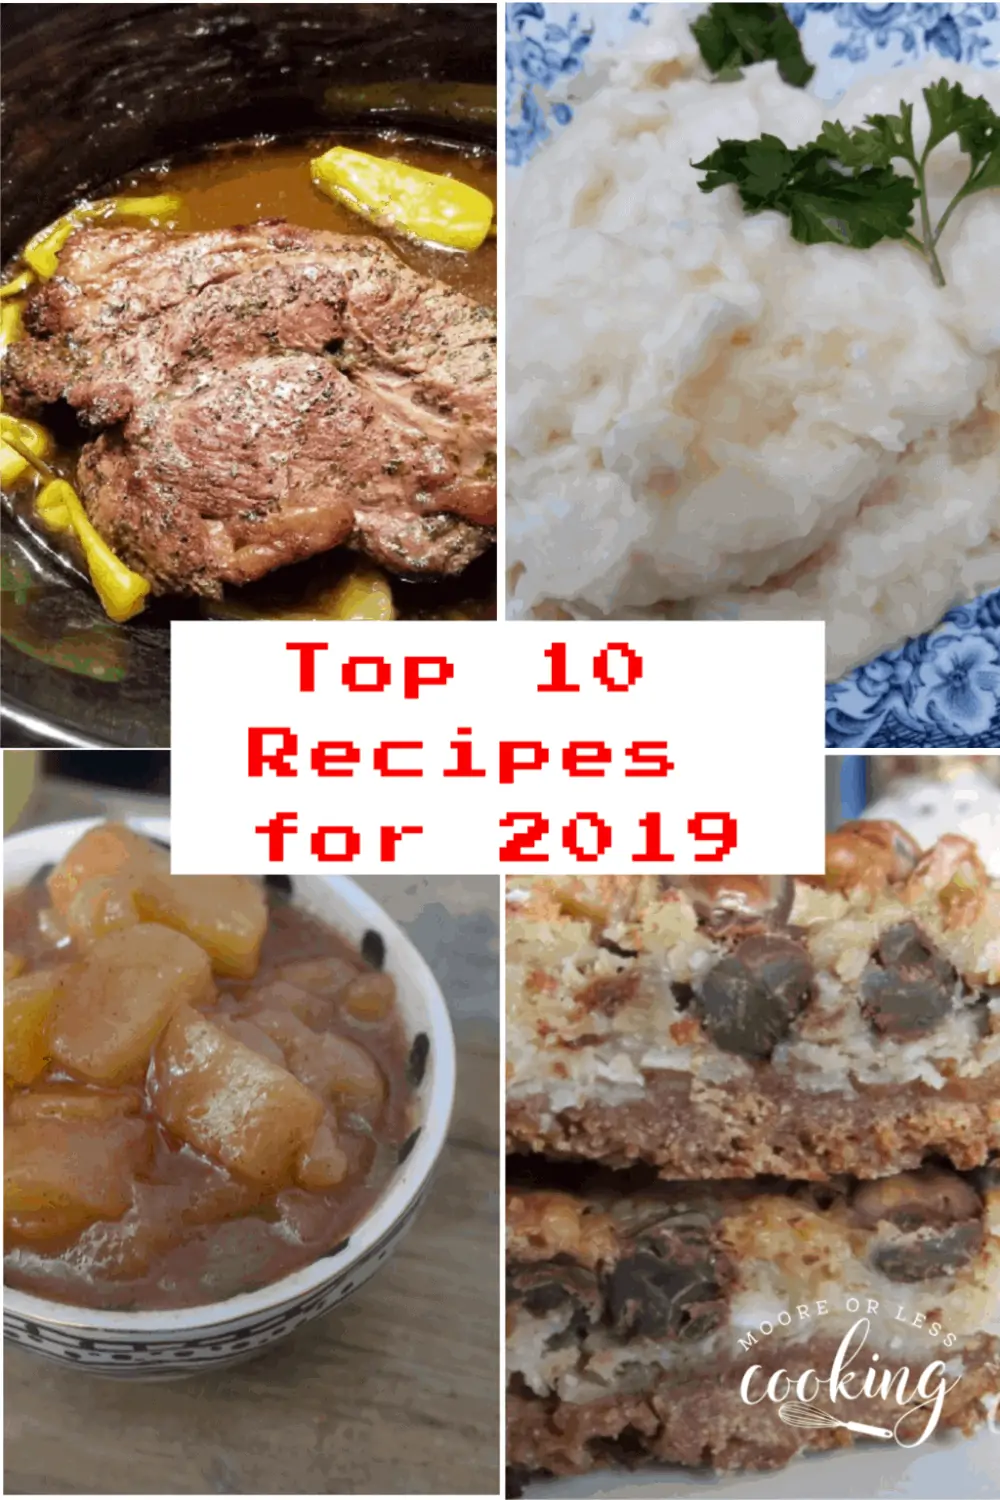 Top TEN Recipes for 2019 for Mooreorlesscooking.com #Bestrecipes #toptenrecipes #mooreorlesscooking #cooking #baking #bestofthebest via @Mooreorlesscook